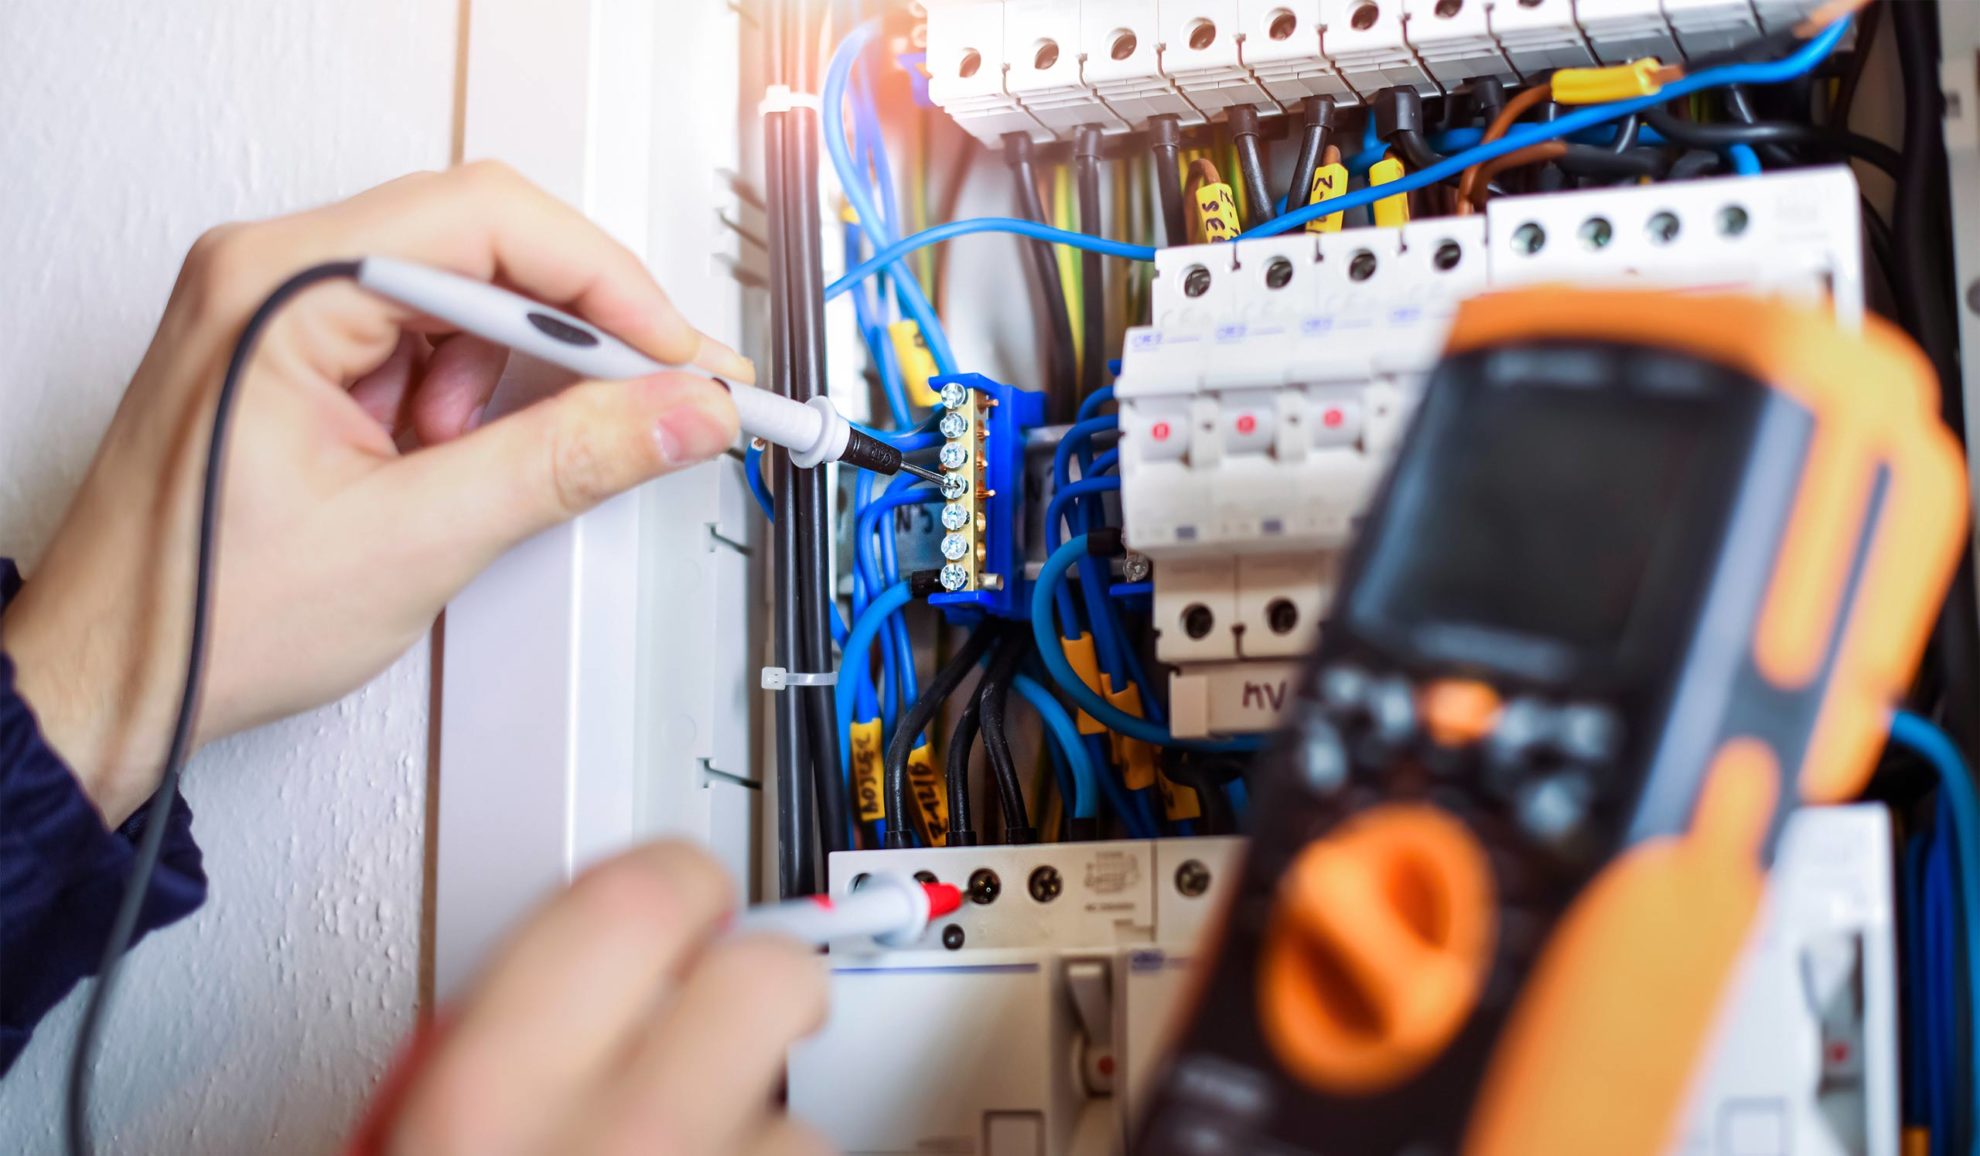 electrician-hands-with-tools-close-up-repairing-electrical-panel-auburn-ca